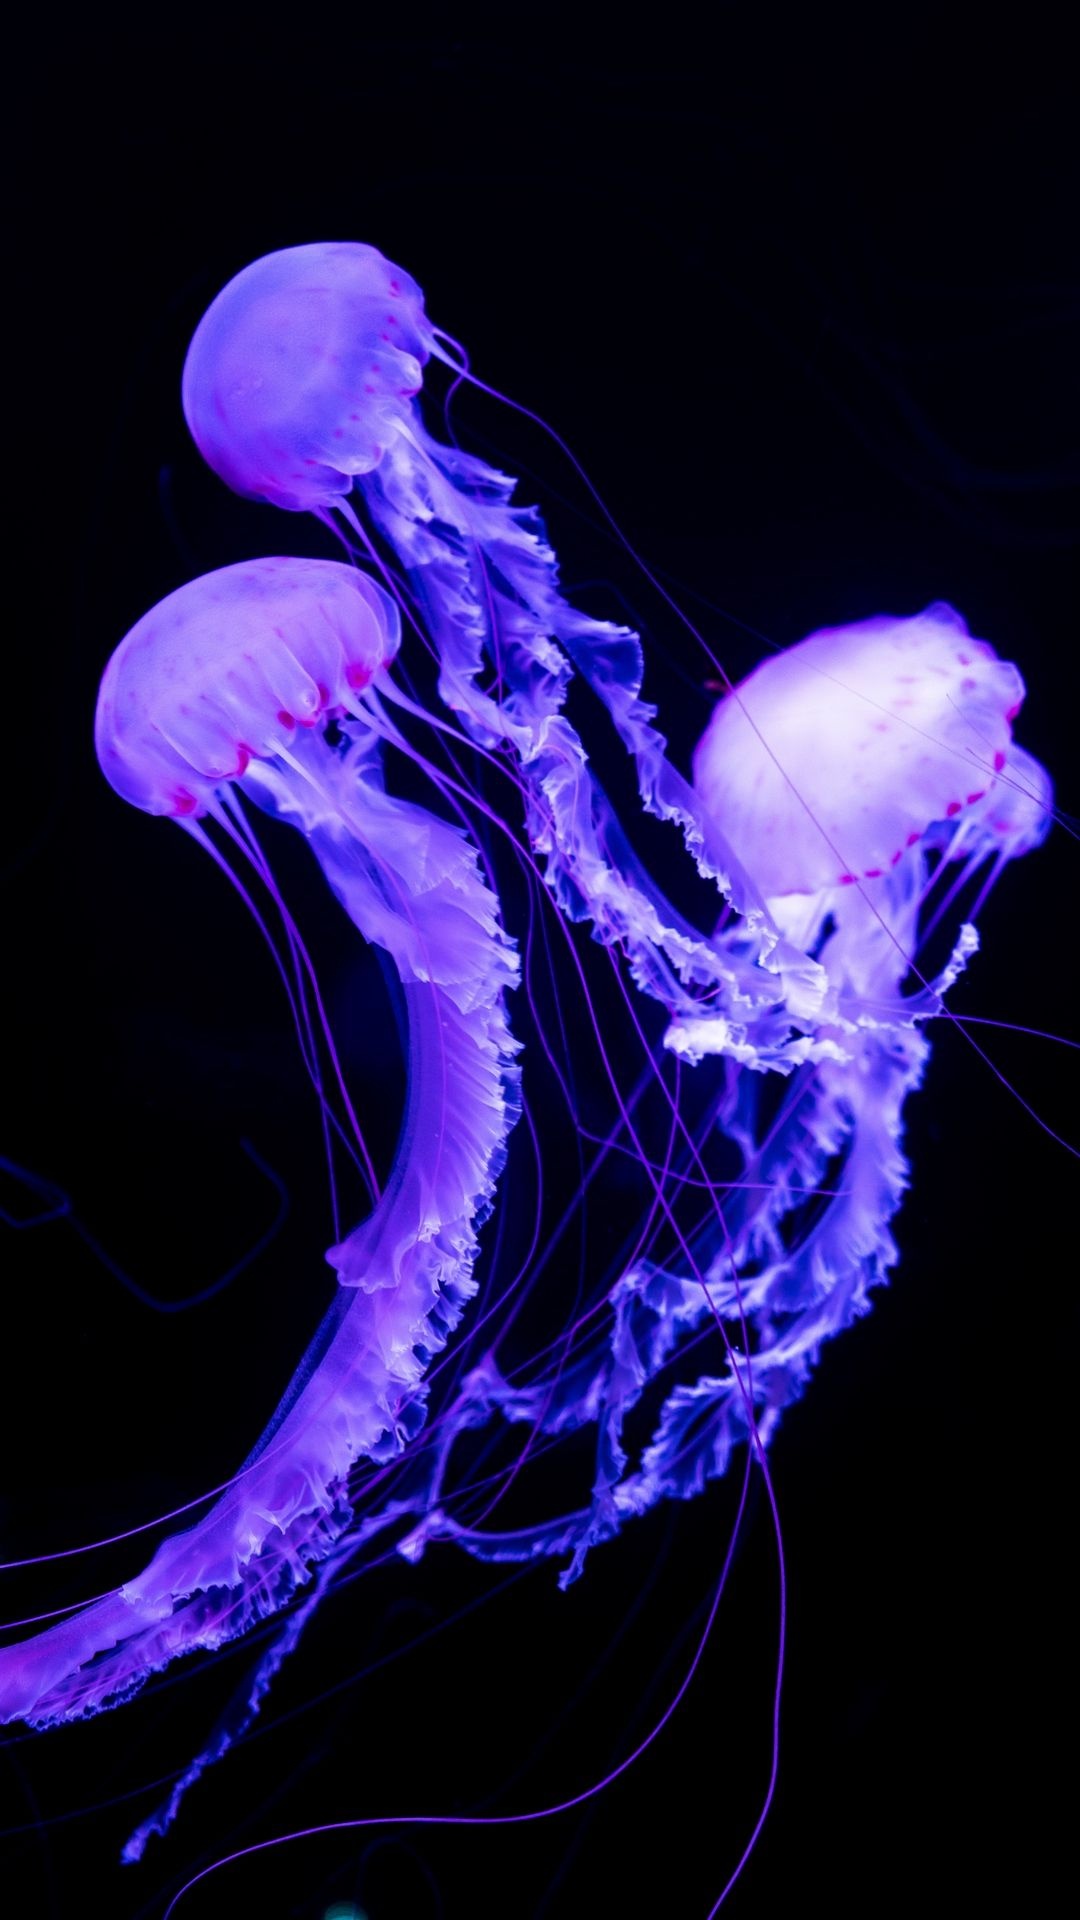 Beautiful jellyfish iPhone wallpaper, Exquisite mobile background, Captivating sea creatures, Aesthetic imagery, 1080x1920 Full HD Phone